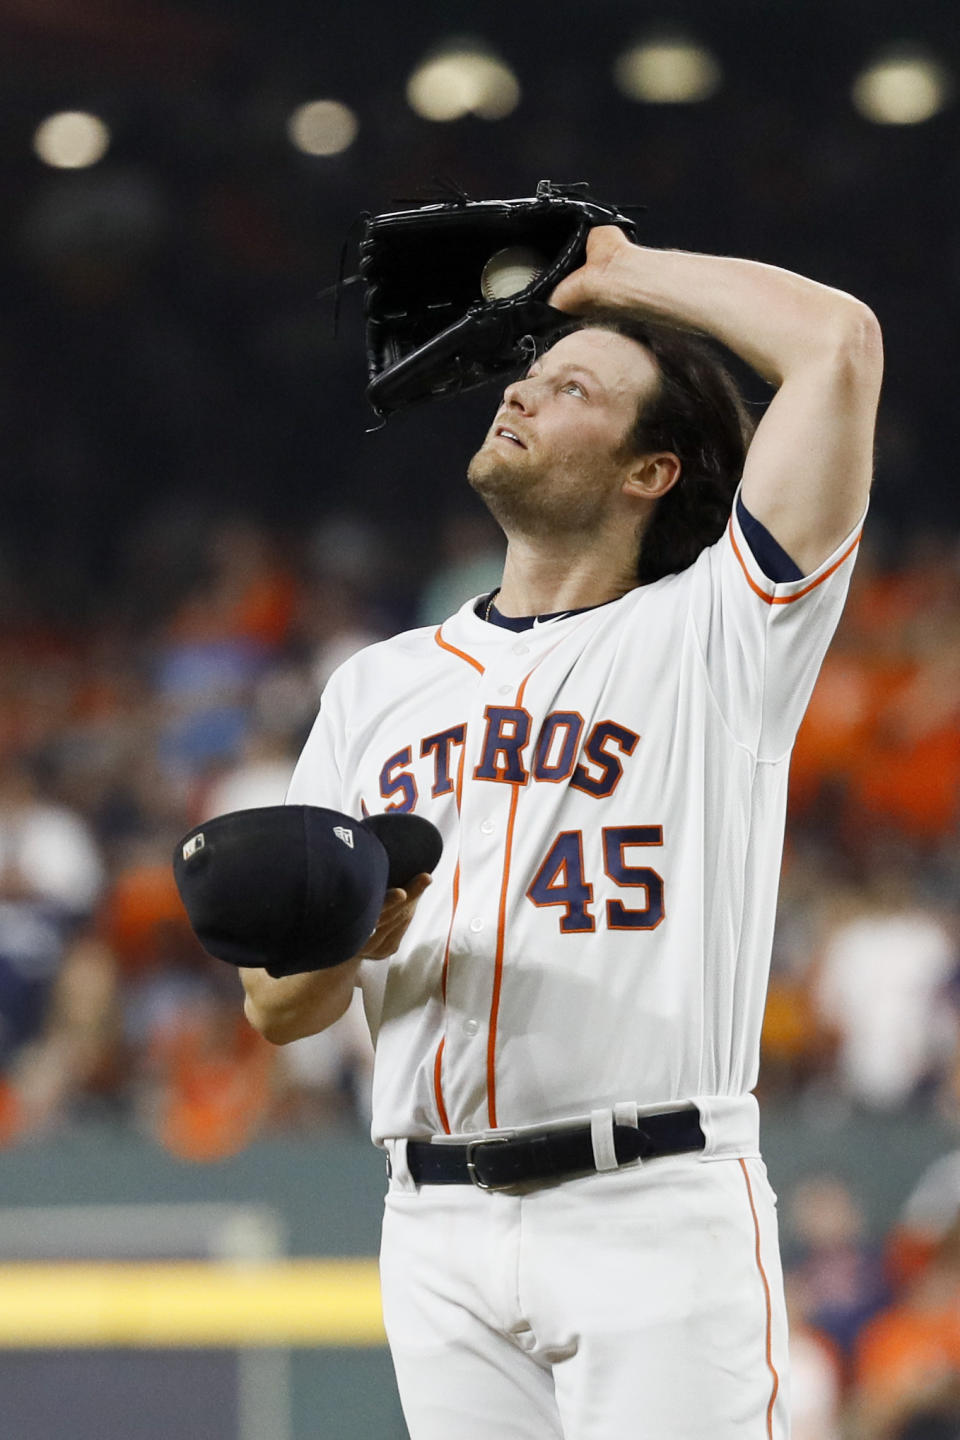 Houston Astros starting pitcher Gerrit Cole wipes his fave after giving up a double to Washington Nationals' Juan Soto during the fifth inning of Game 1 of the baseball World Series Tuesday, Oct. 22, 2019, in Houston. (AP Photo/Matt Slocum)